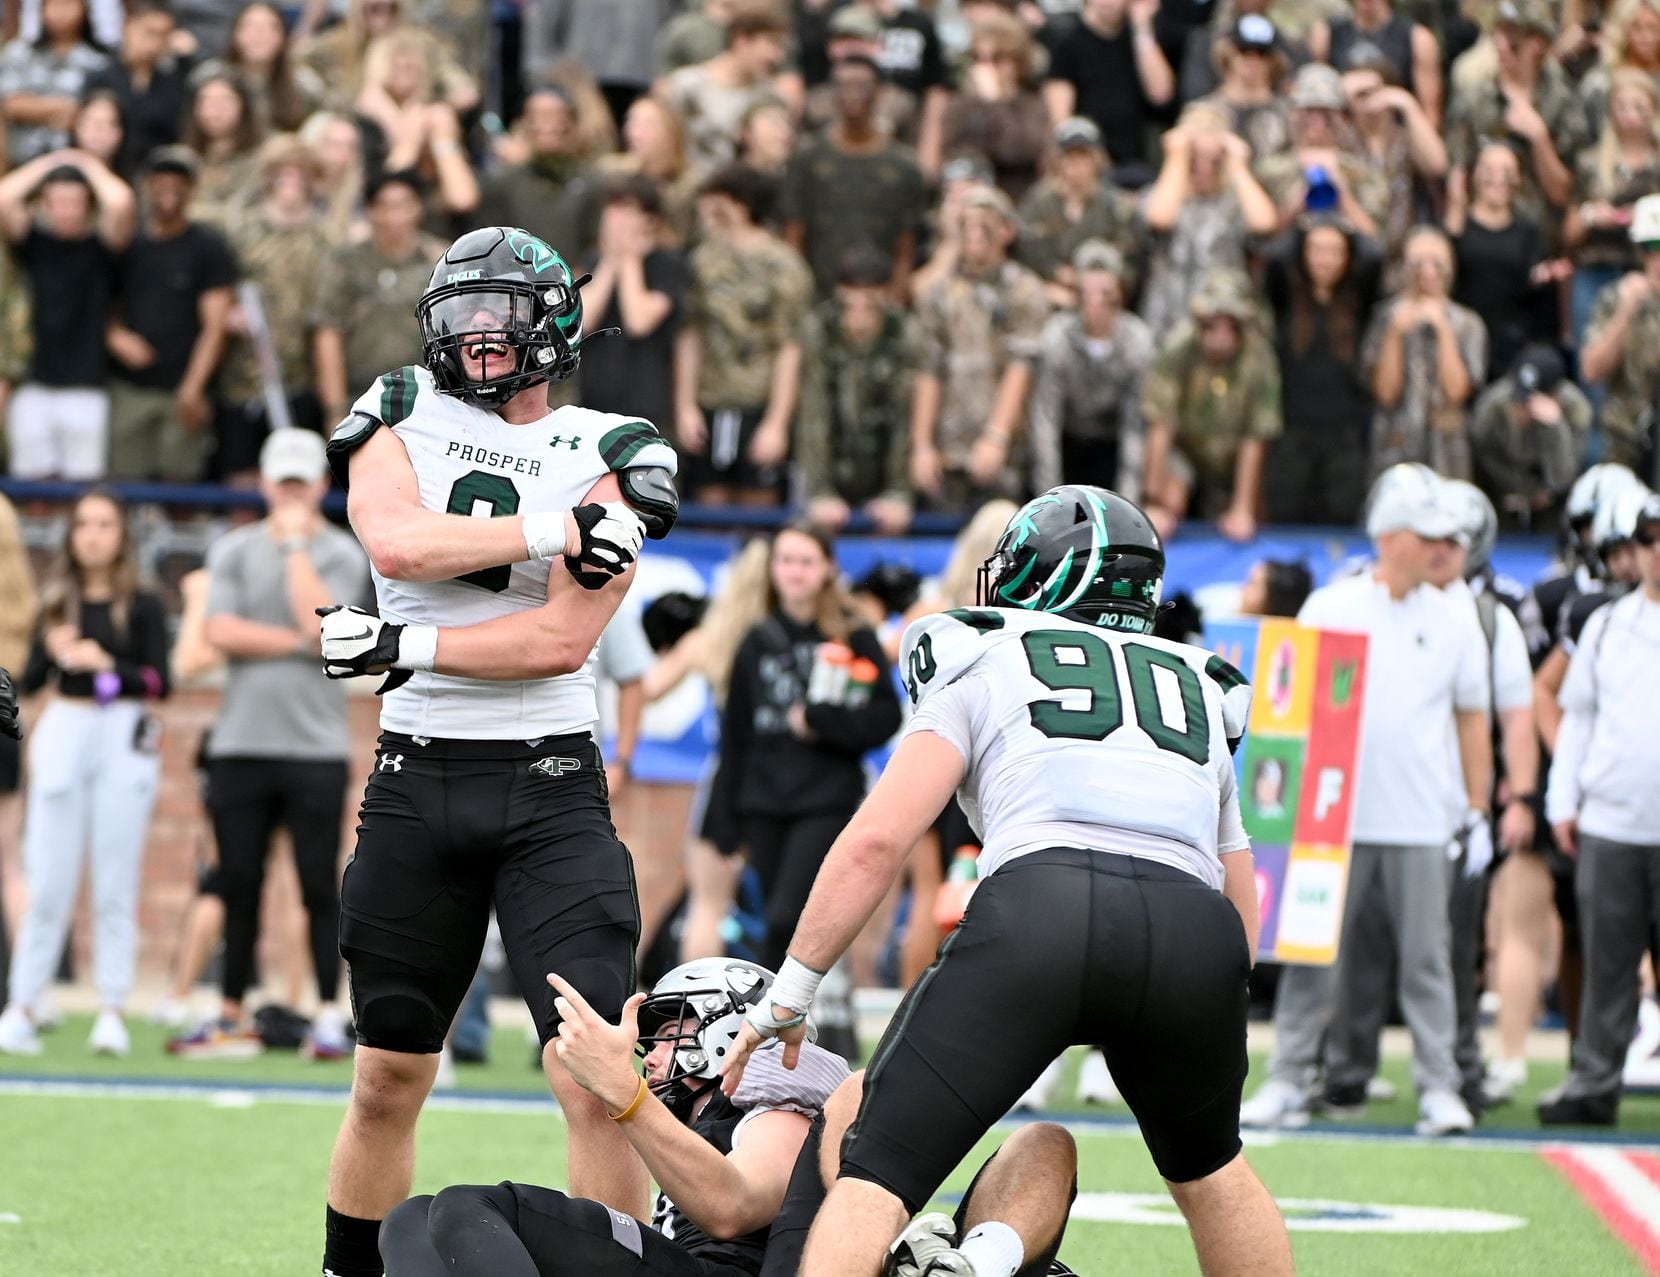 Prosper’s Aeden Combest (9) and Justin Endicott (90) celebrate after sacking Denton Guyer's Jackson Arnold (11) in the first half of a Class 6A Division II Region I final high school playoff football game between Denton Guyer and Prosper, Saturday, Dec. 4, 2021, in Allen, Texas. Celina won 34-0. (Matt Strasen/Special Contributor)